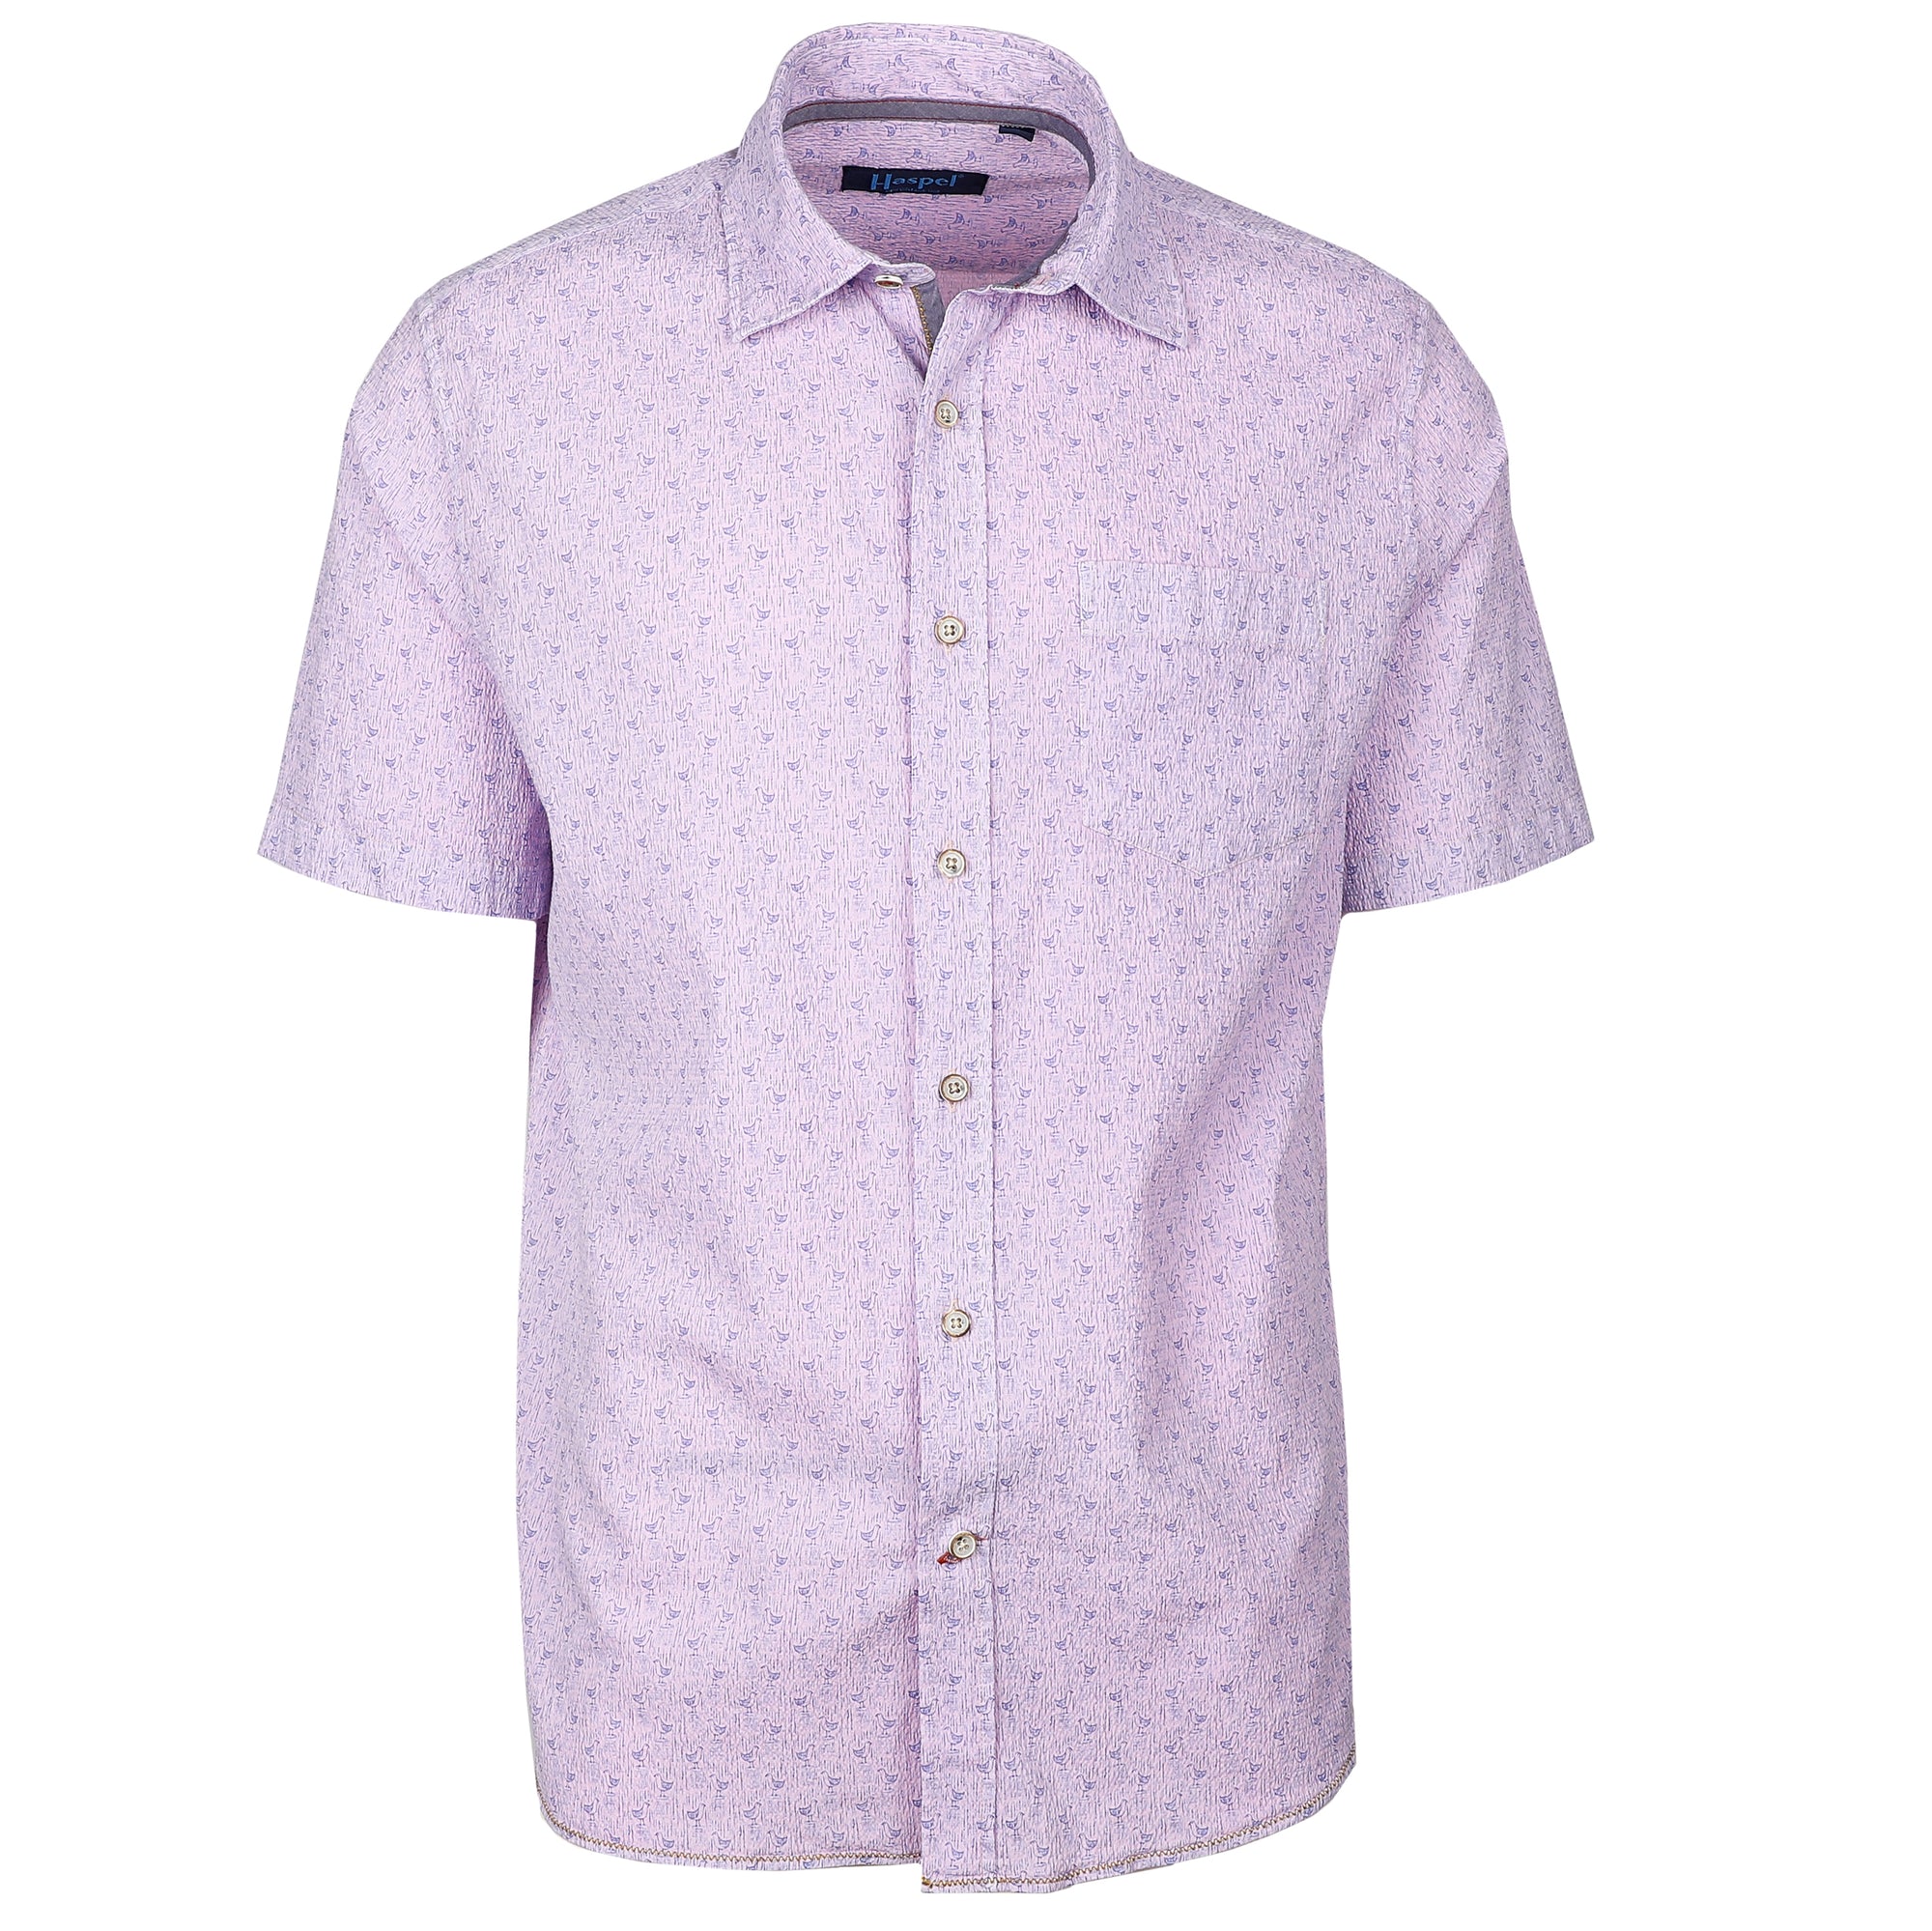 Be effortlessly stylish and comfortable in any season with the Paestum Pink Early Bird Short Sleeve Shirt. Made from lightweight seersucker fabric that's expertly dyed to create a distinctive look, this shirt will keep you looking cool even in warm weather. Get ready to turn heads with this striking style.  100% Cotton Seersucker • Short Sleeve • Spread Collar • No Chest Pocket • Machine Wash • Made in Italy